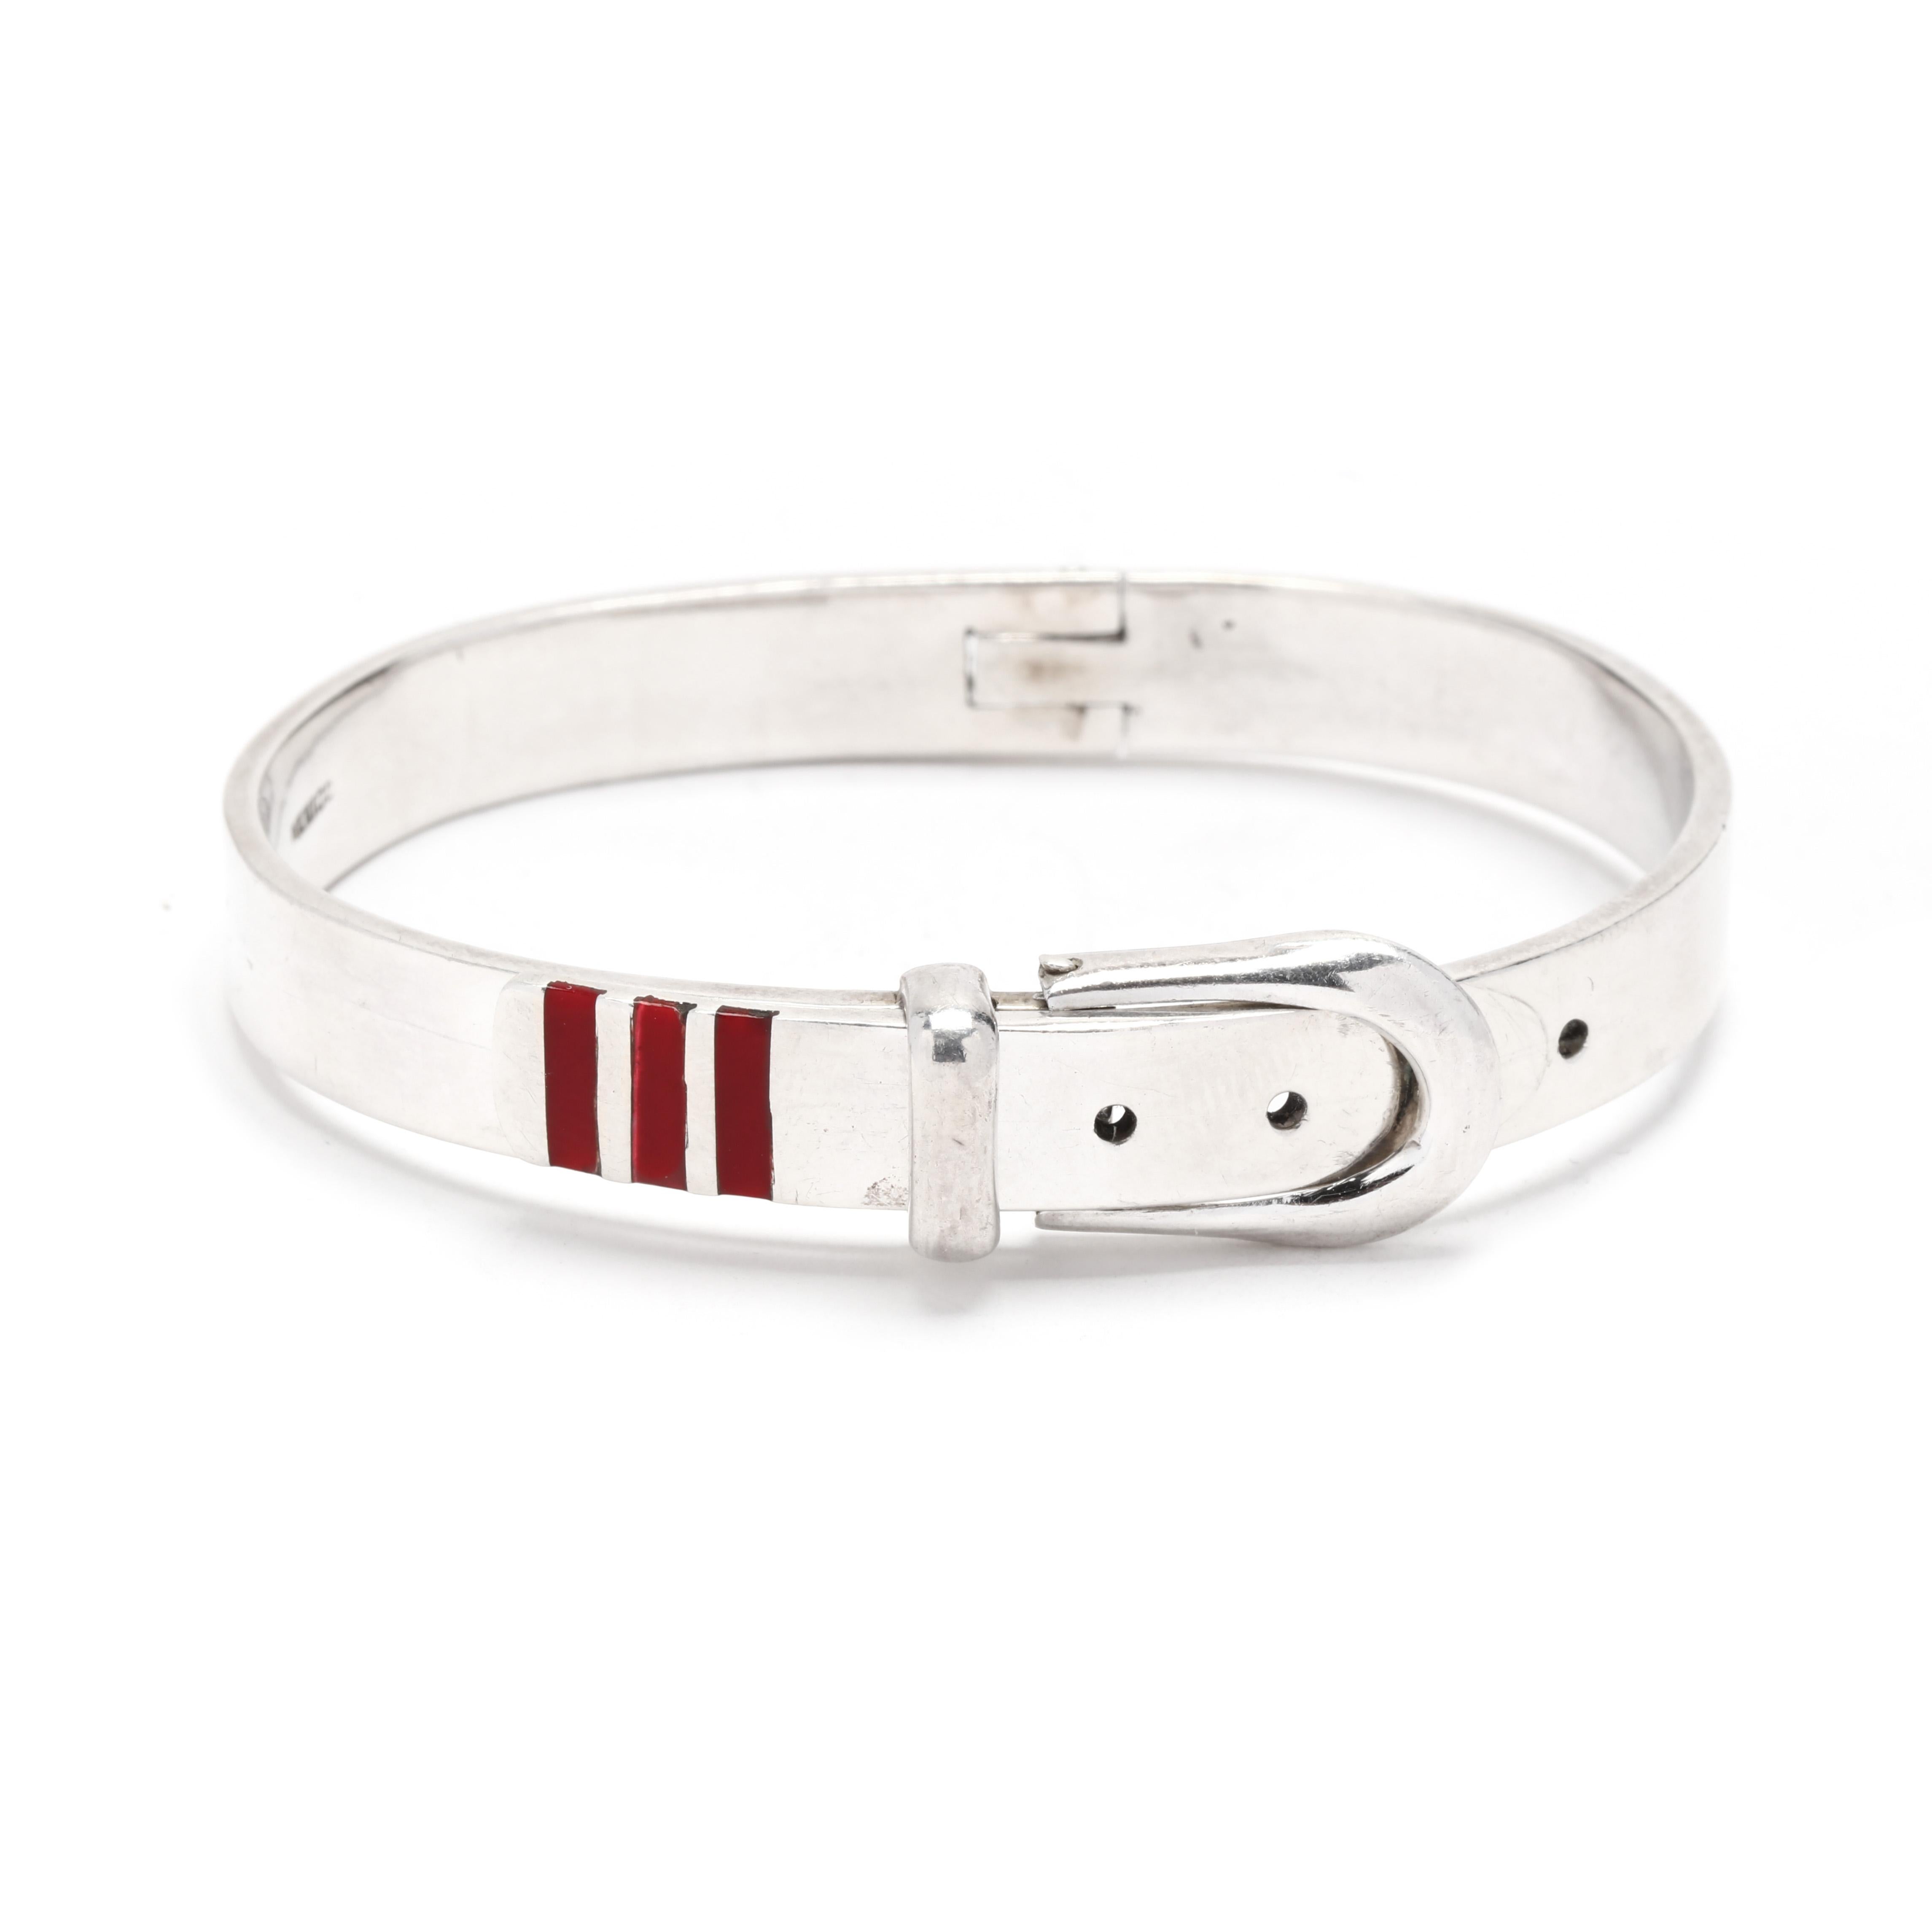 A vintage sterling silver red enamel belt buckle motif hinged bangle bracelet.  This bracelet features a belt buckle design with three bands of red enamel inlay.  It is hinged and the buckle serves as the clasp.  It is stamped 925 Mexico.

Length: